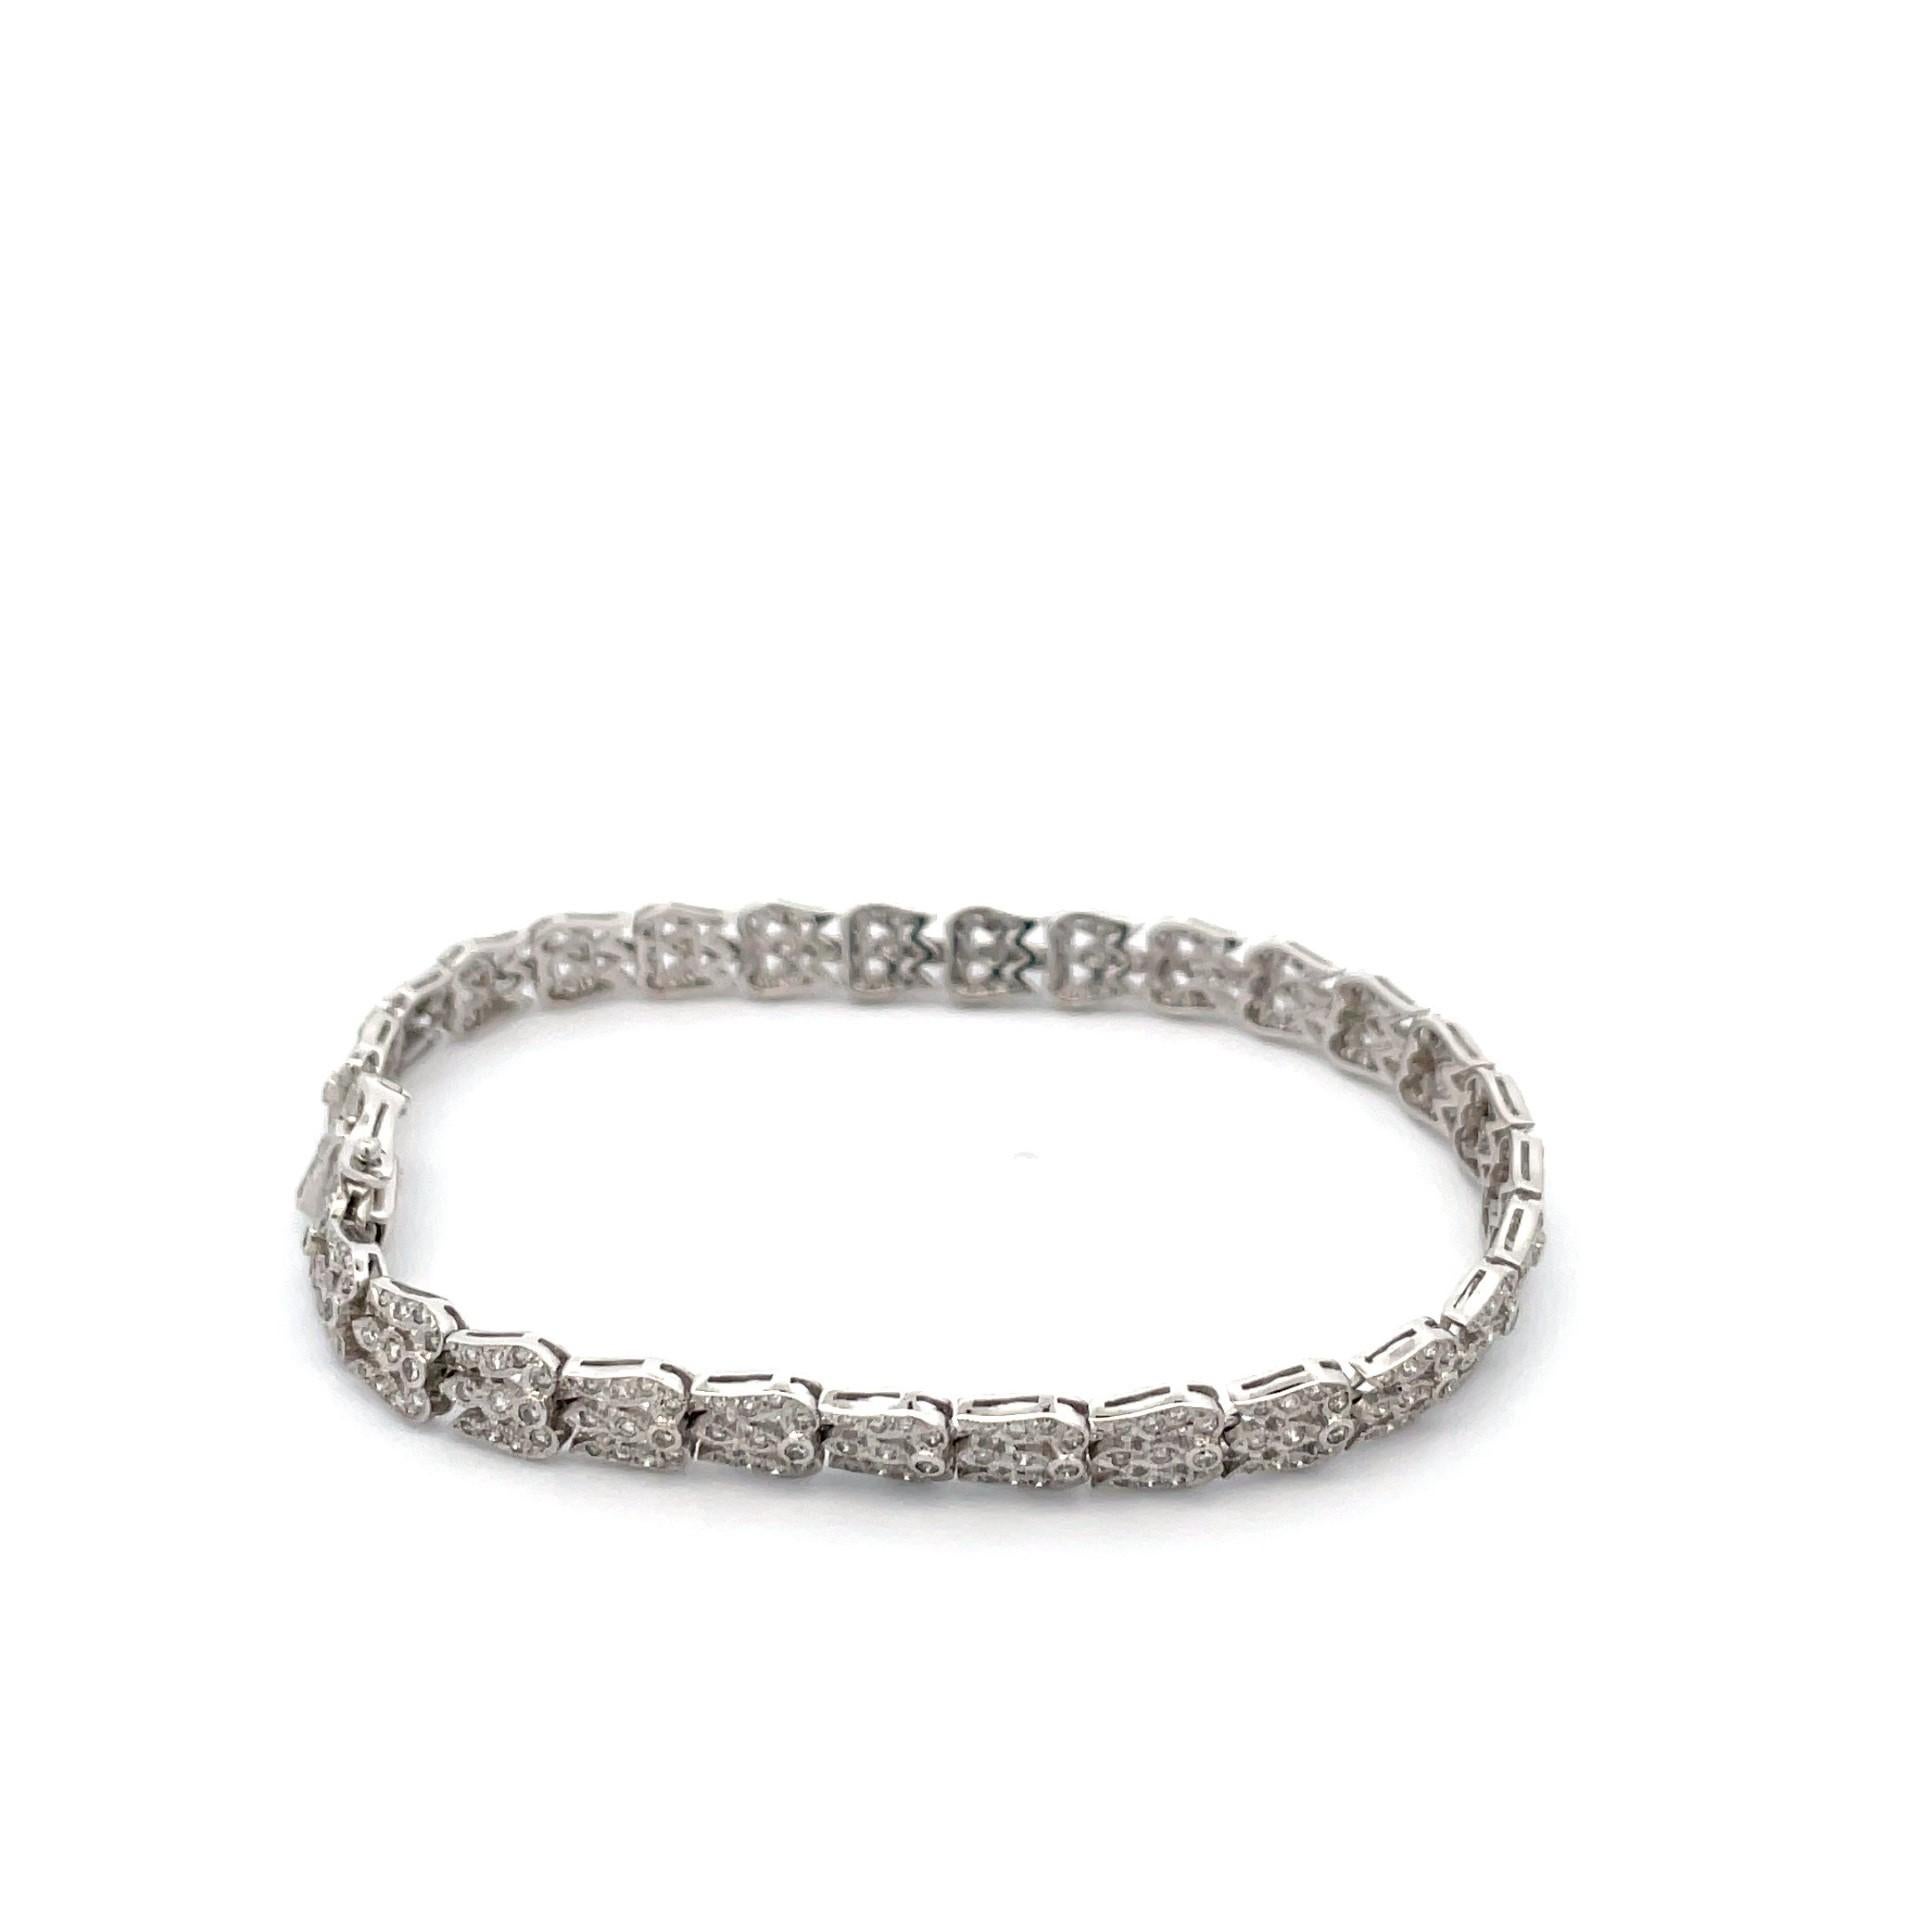 One 18kt white gold pave bracelet with natural brilliant cut diamonds. 

332 brilliant cut diamonds, weighing 1.73ct total weight

Gold 18kt white weighing 14 grams. 

7 1/2